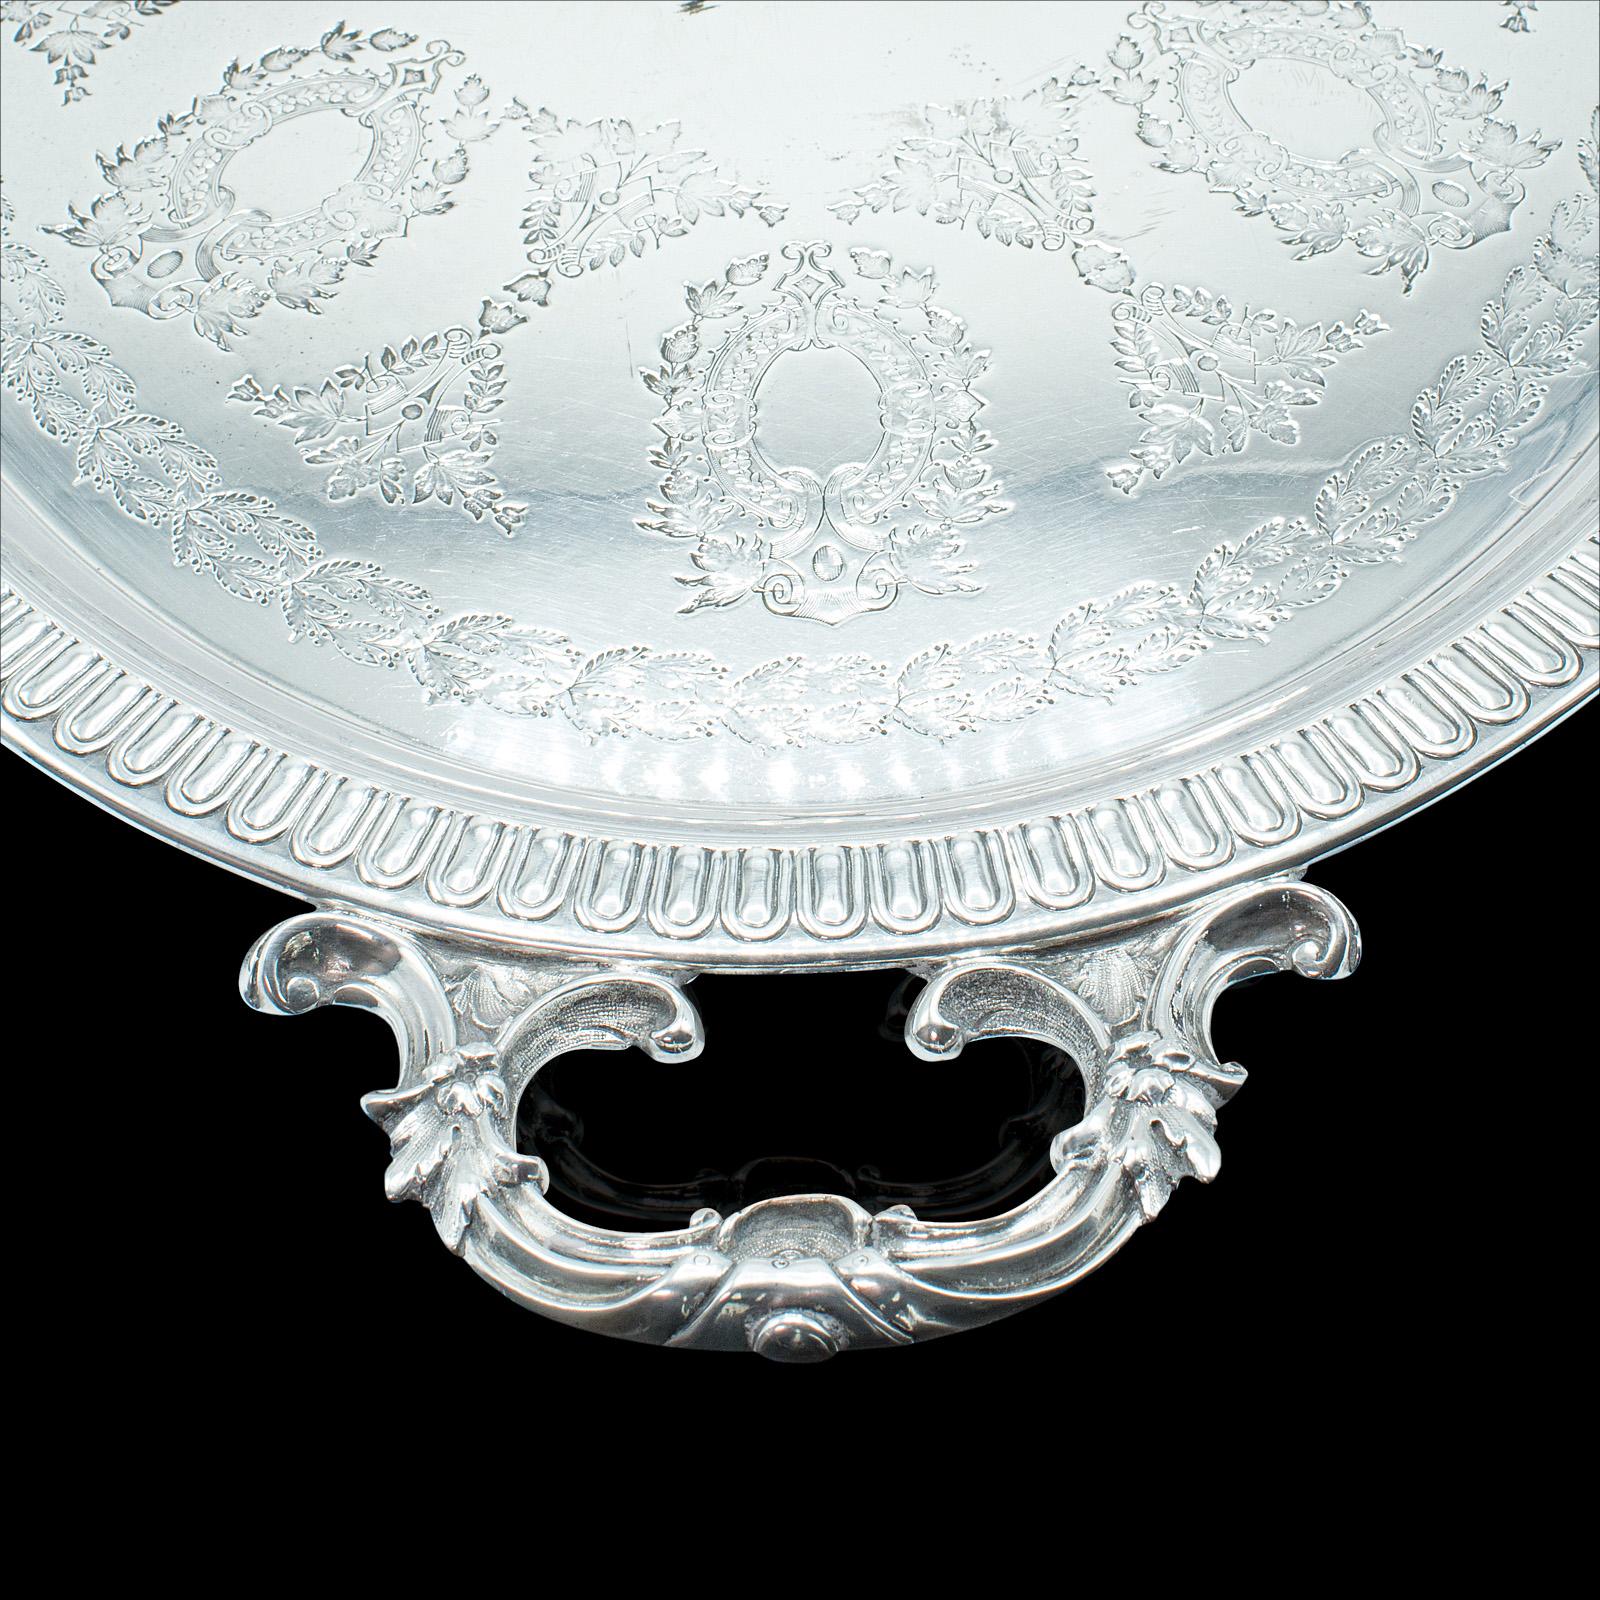 Antique Oval Decorative Serving Tray, English, Silver Plate, Afternoon Tea, 1910 For Sale 1